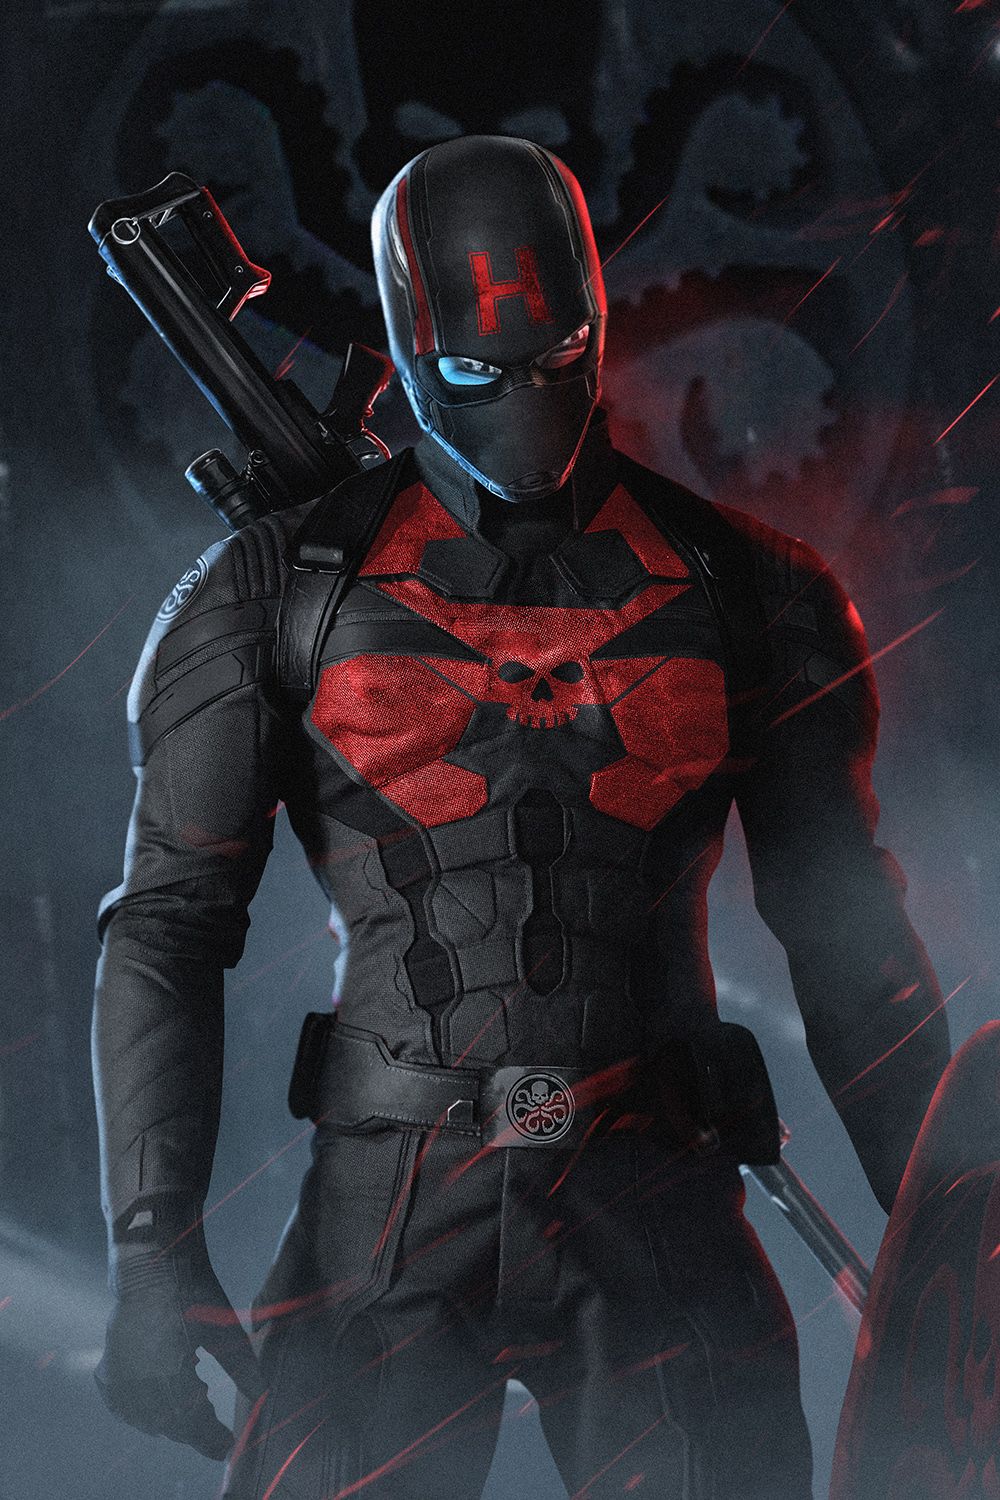 Captain America Hydra Costume and Mask by BossLogic